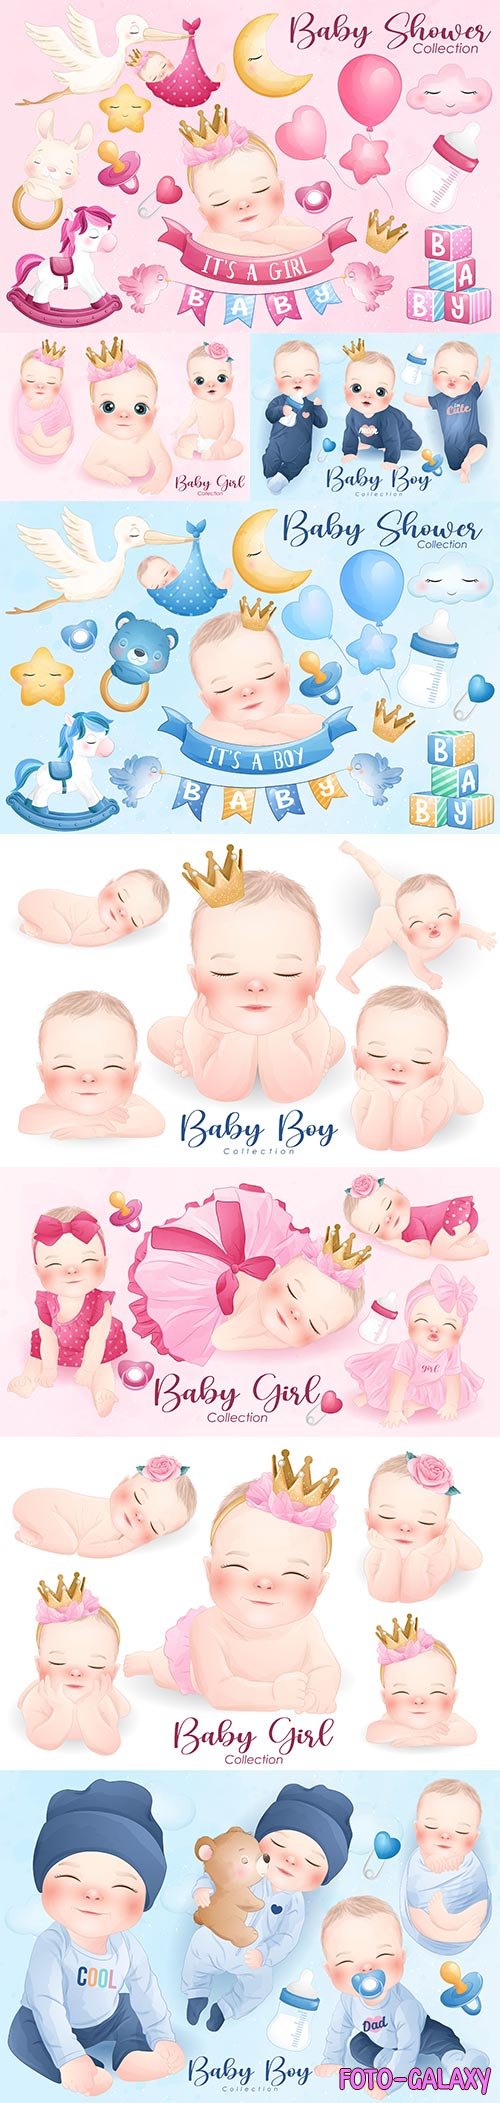 Cute baby girl and boy in watercolor style collection vector